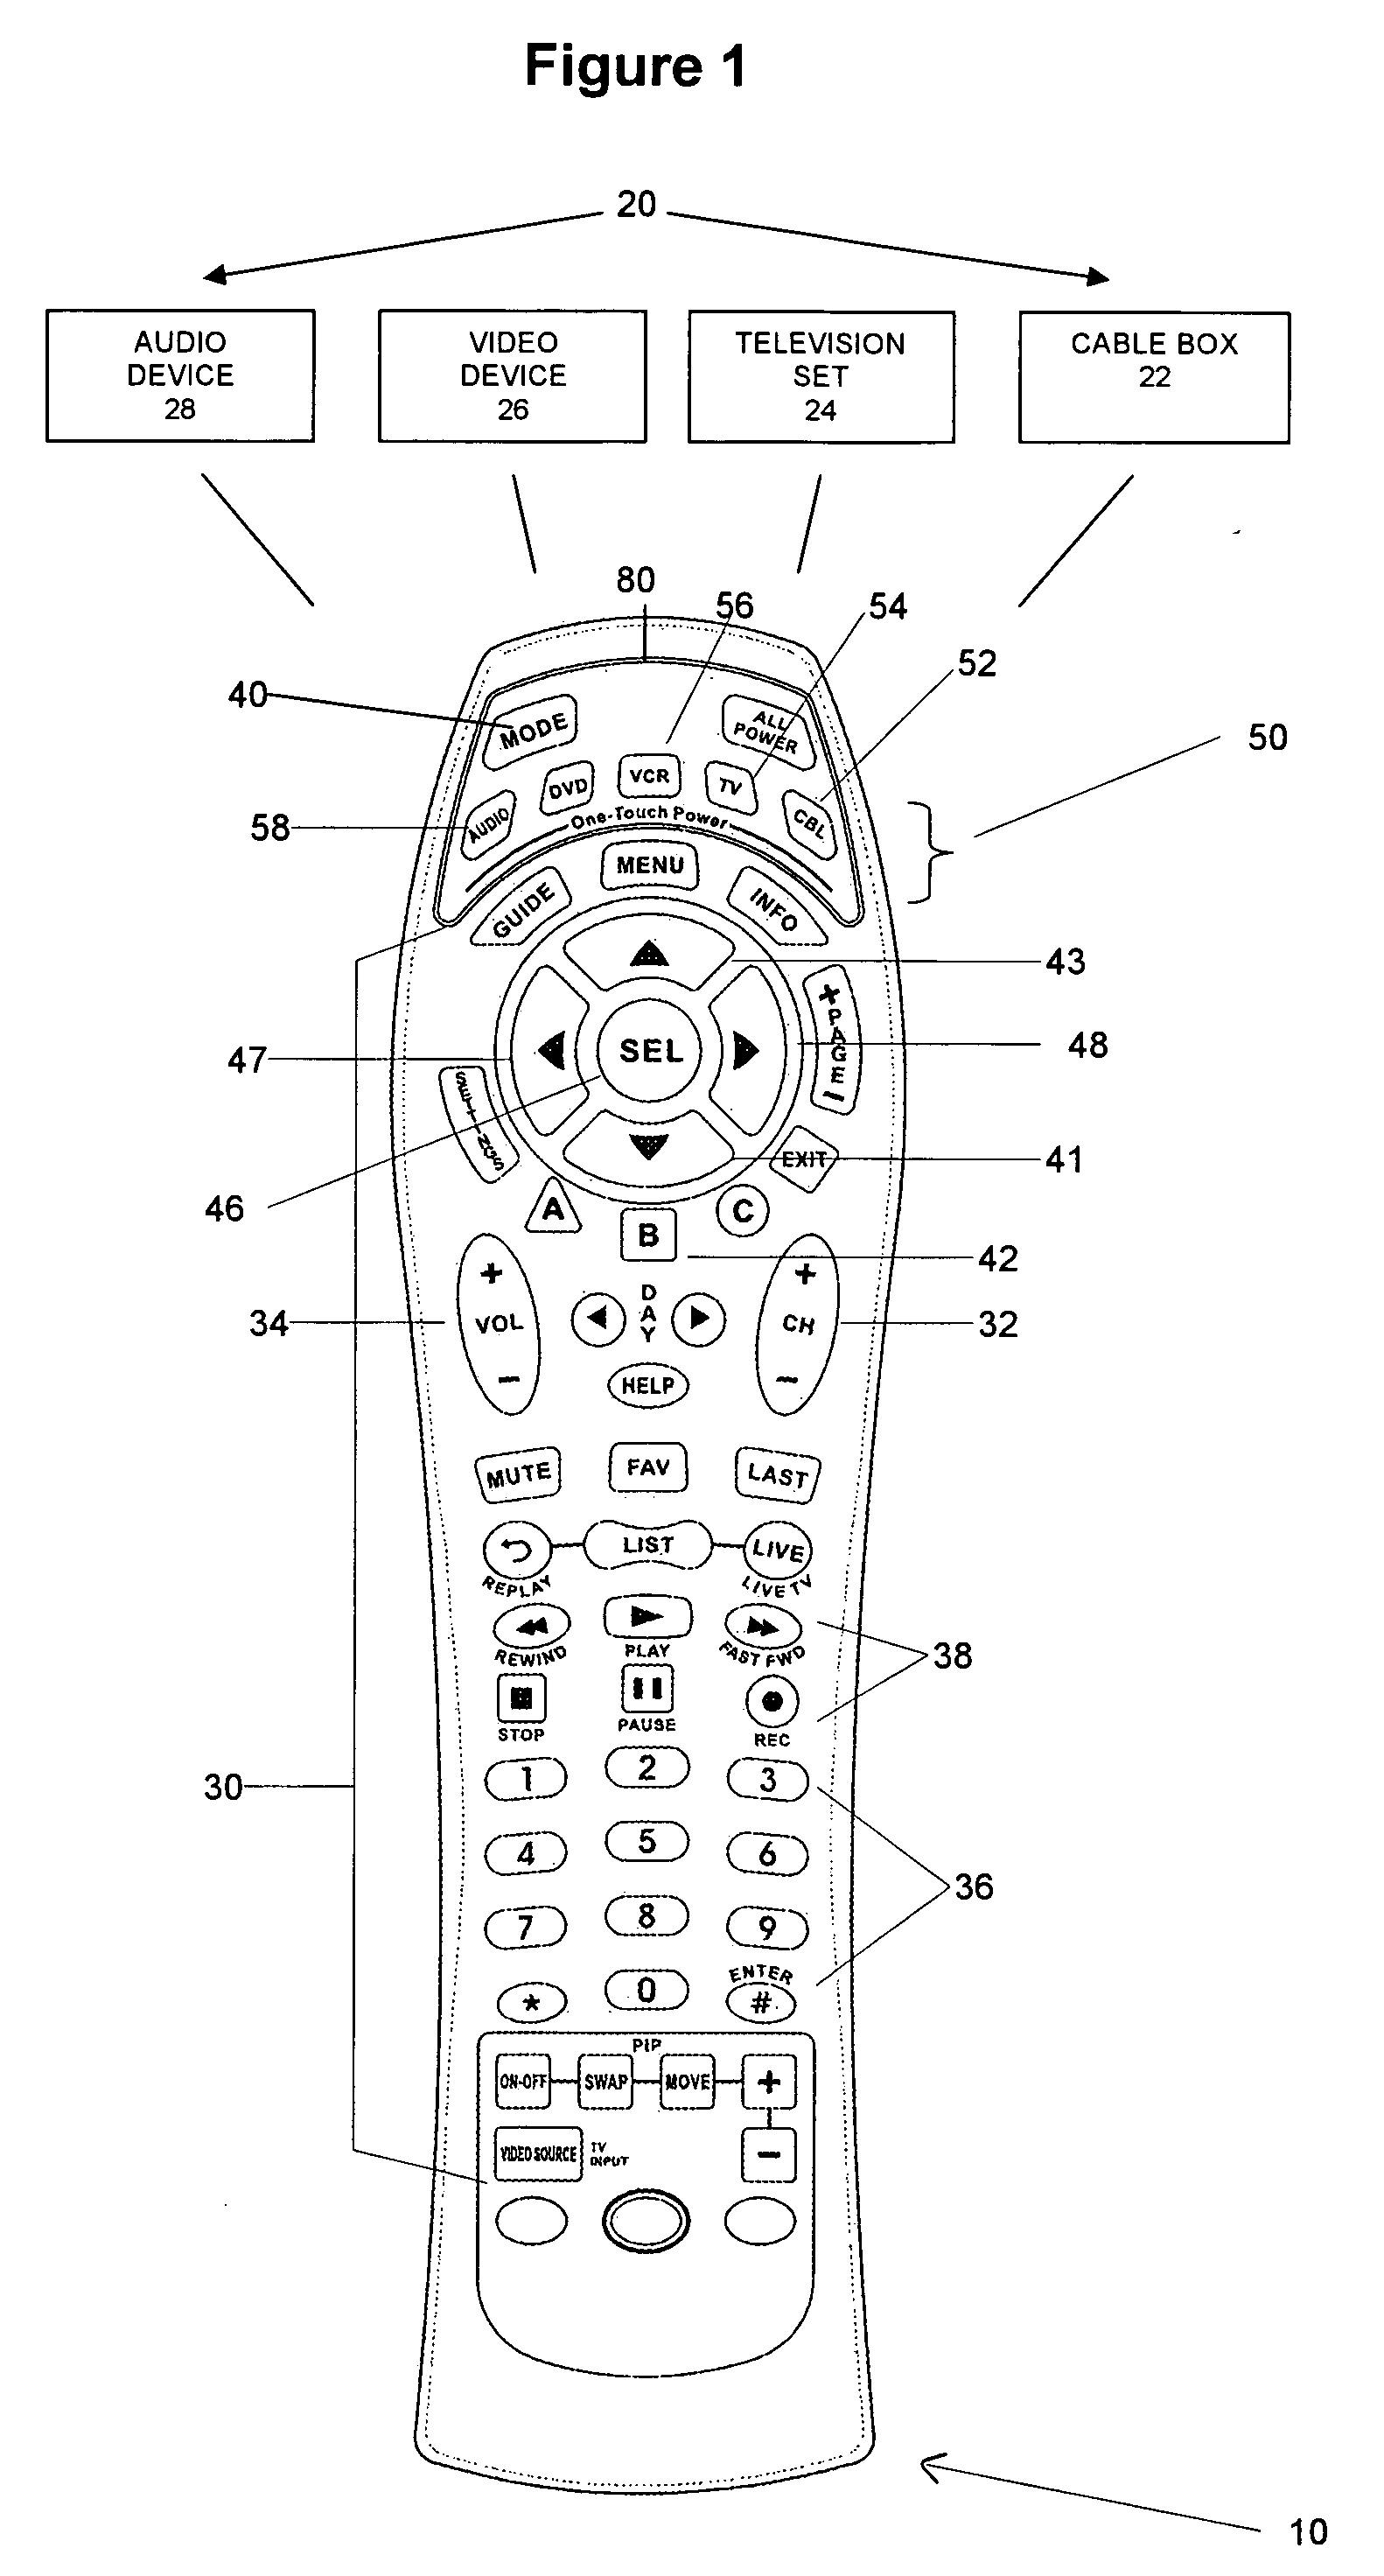 Apparatus and method for updating encoded signal information stored in a remote control unit through direct key entry